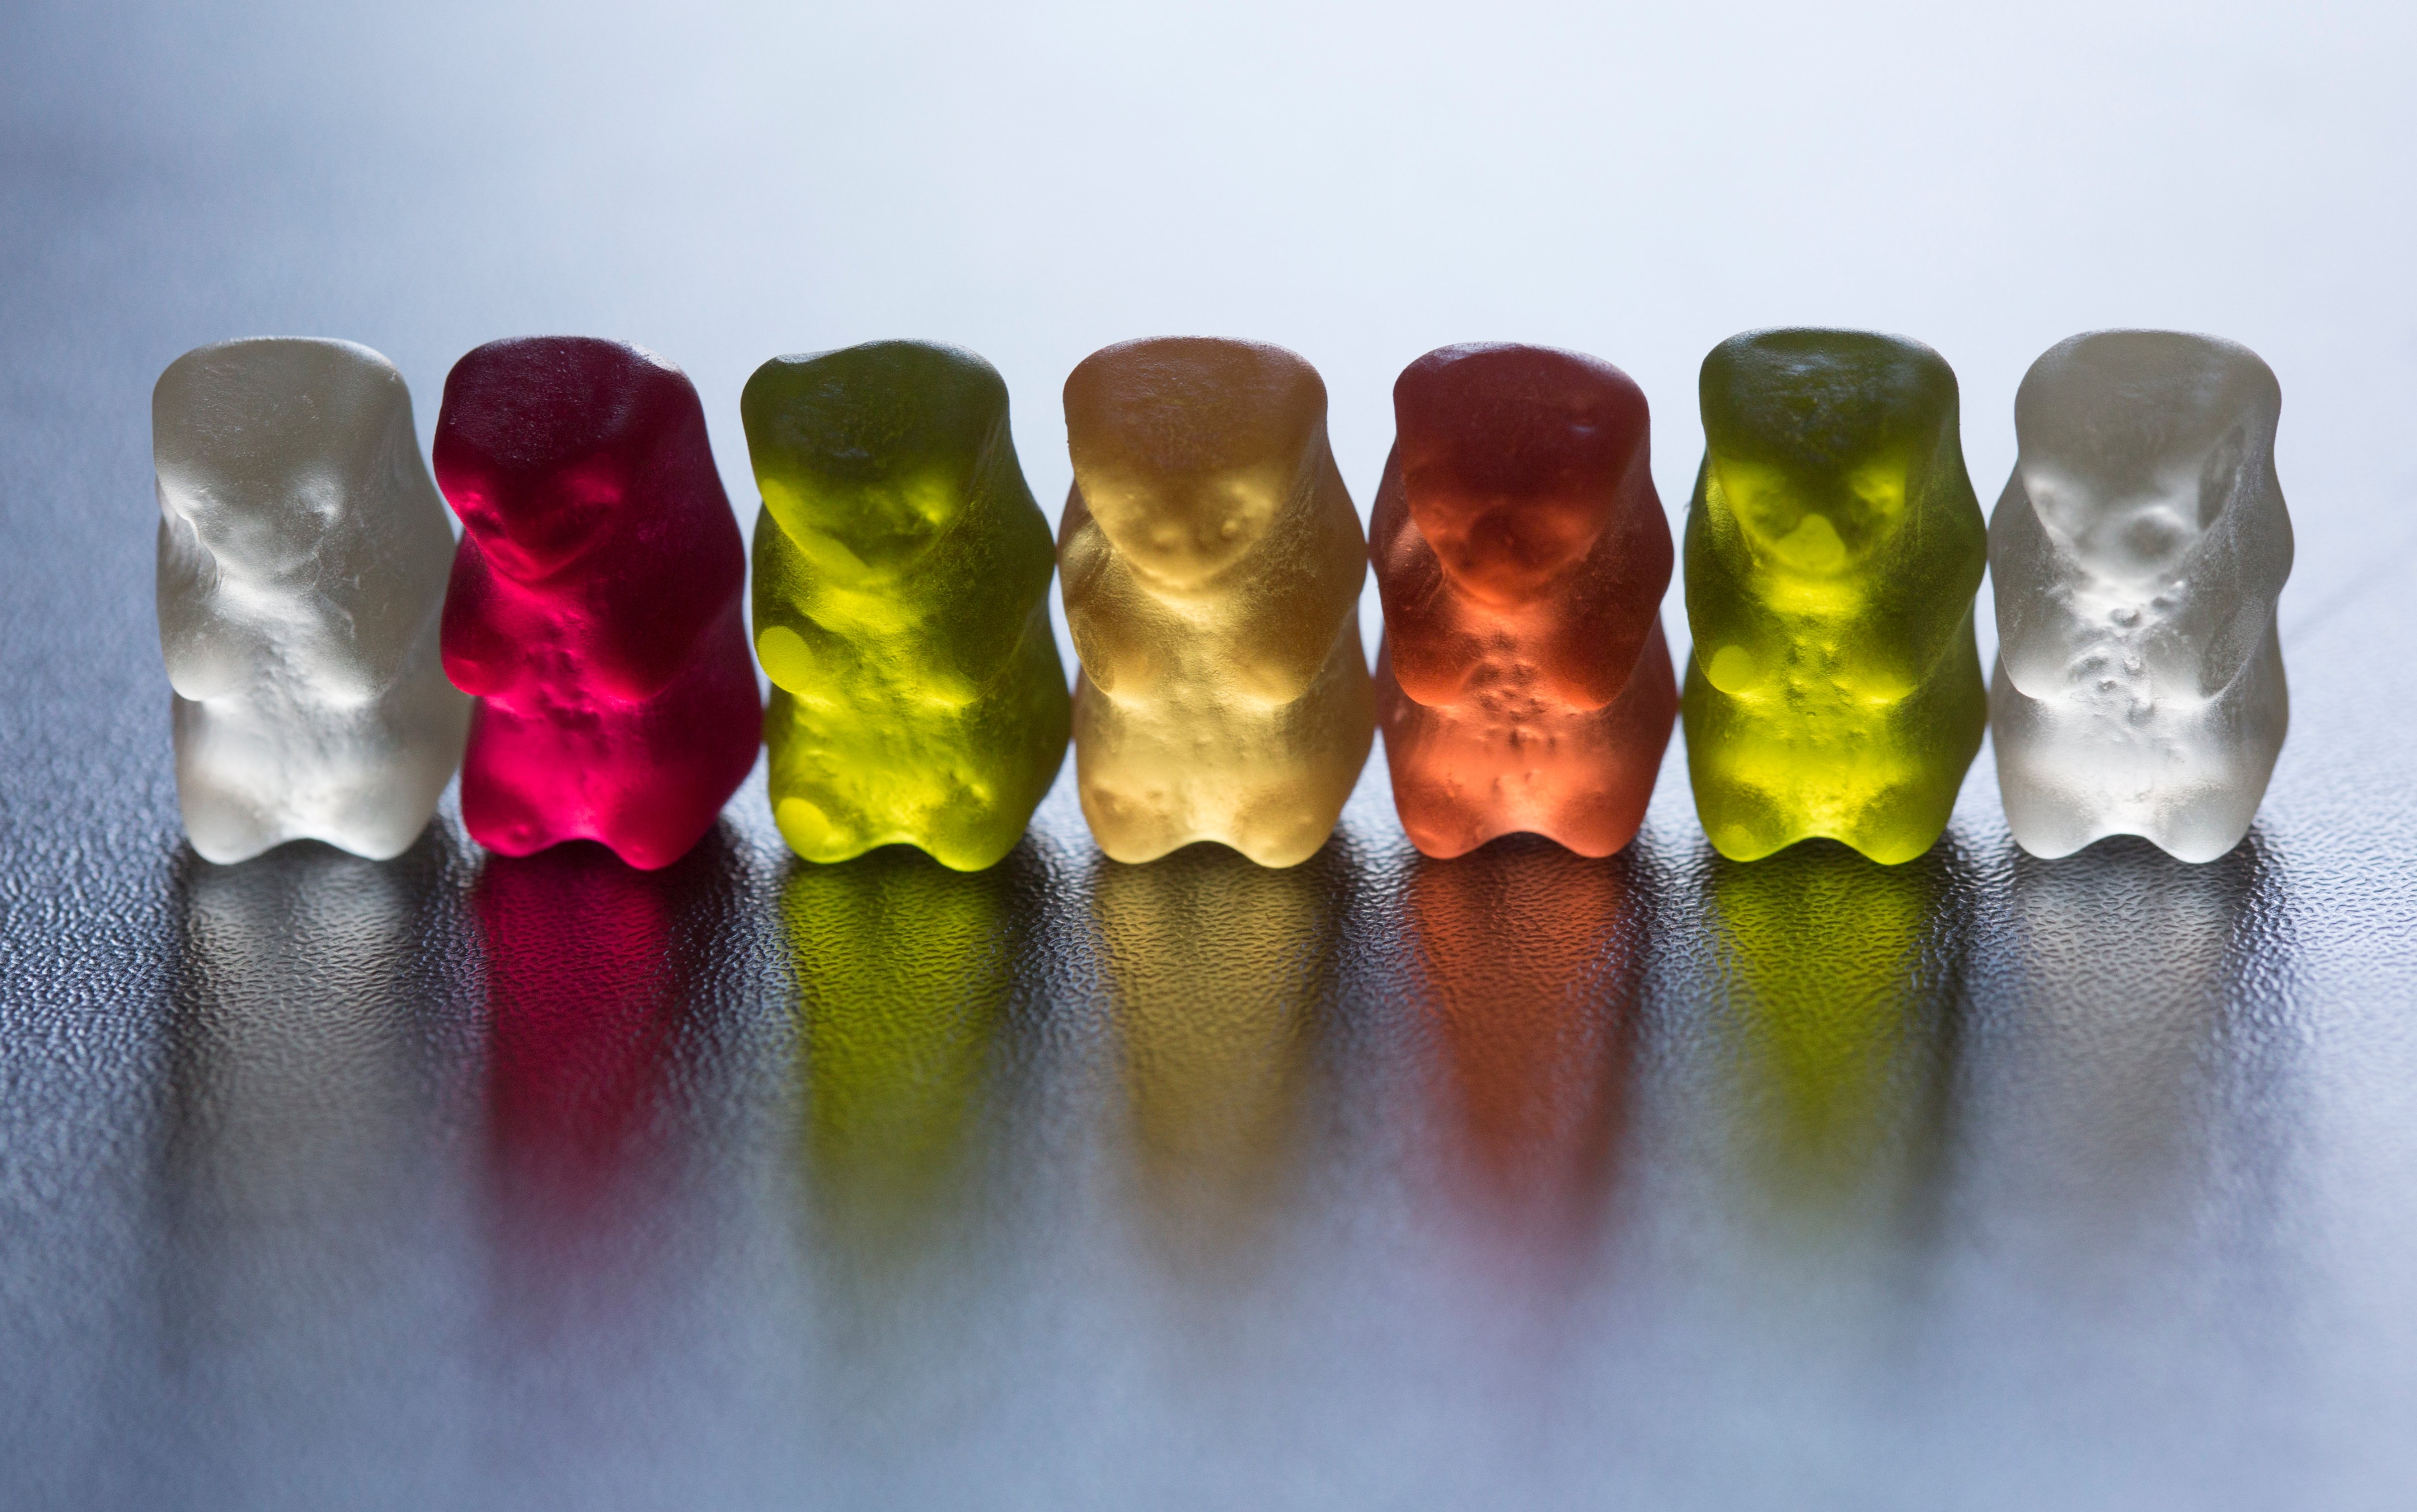 Gummy bears-at the top on the list of the most popular sweets.